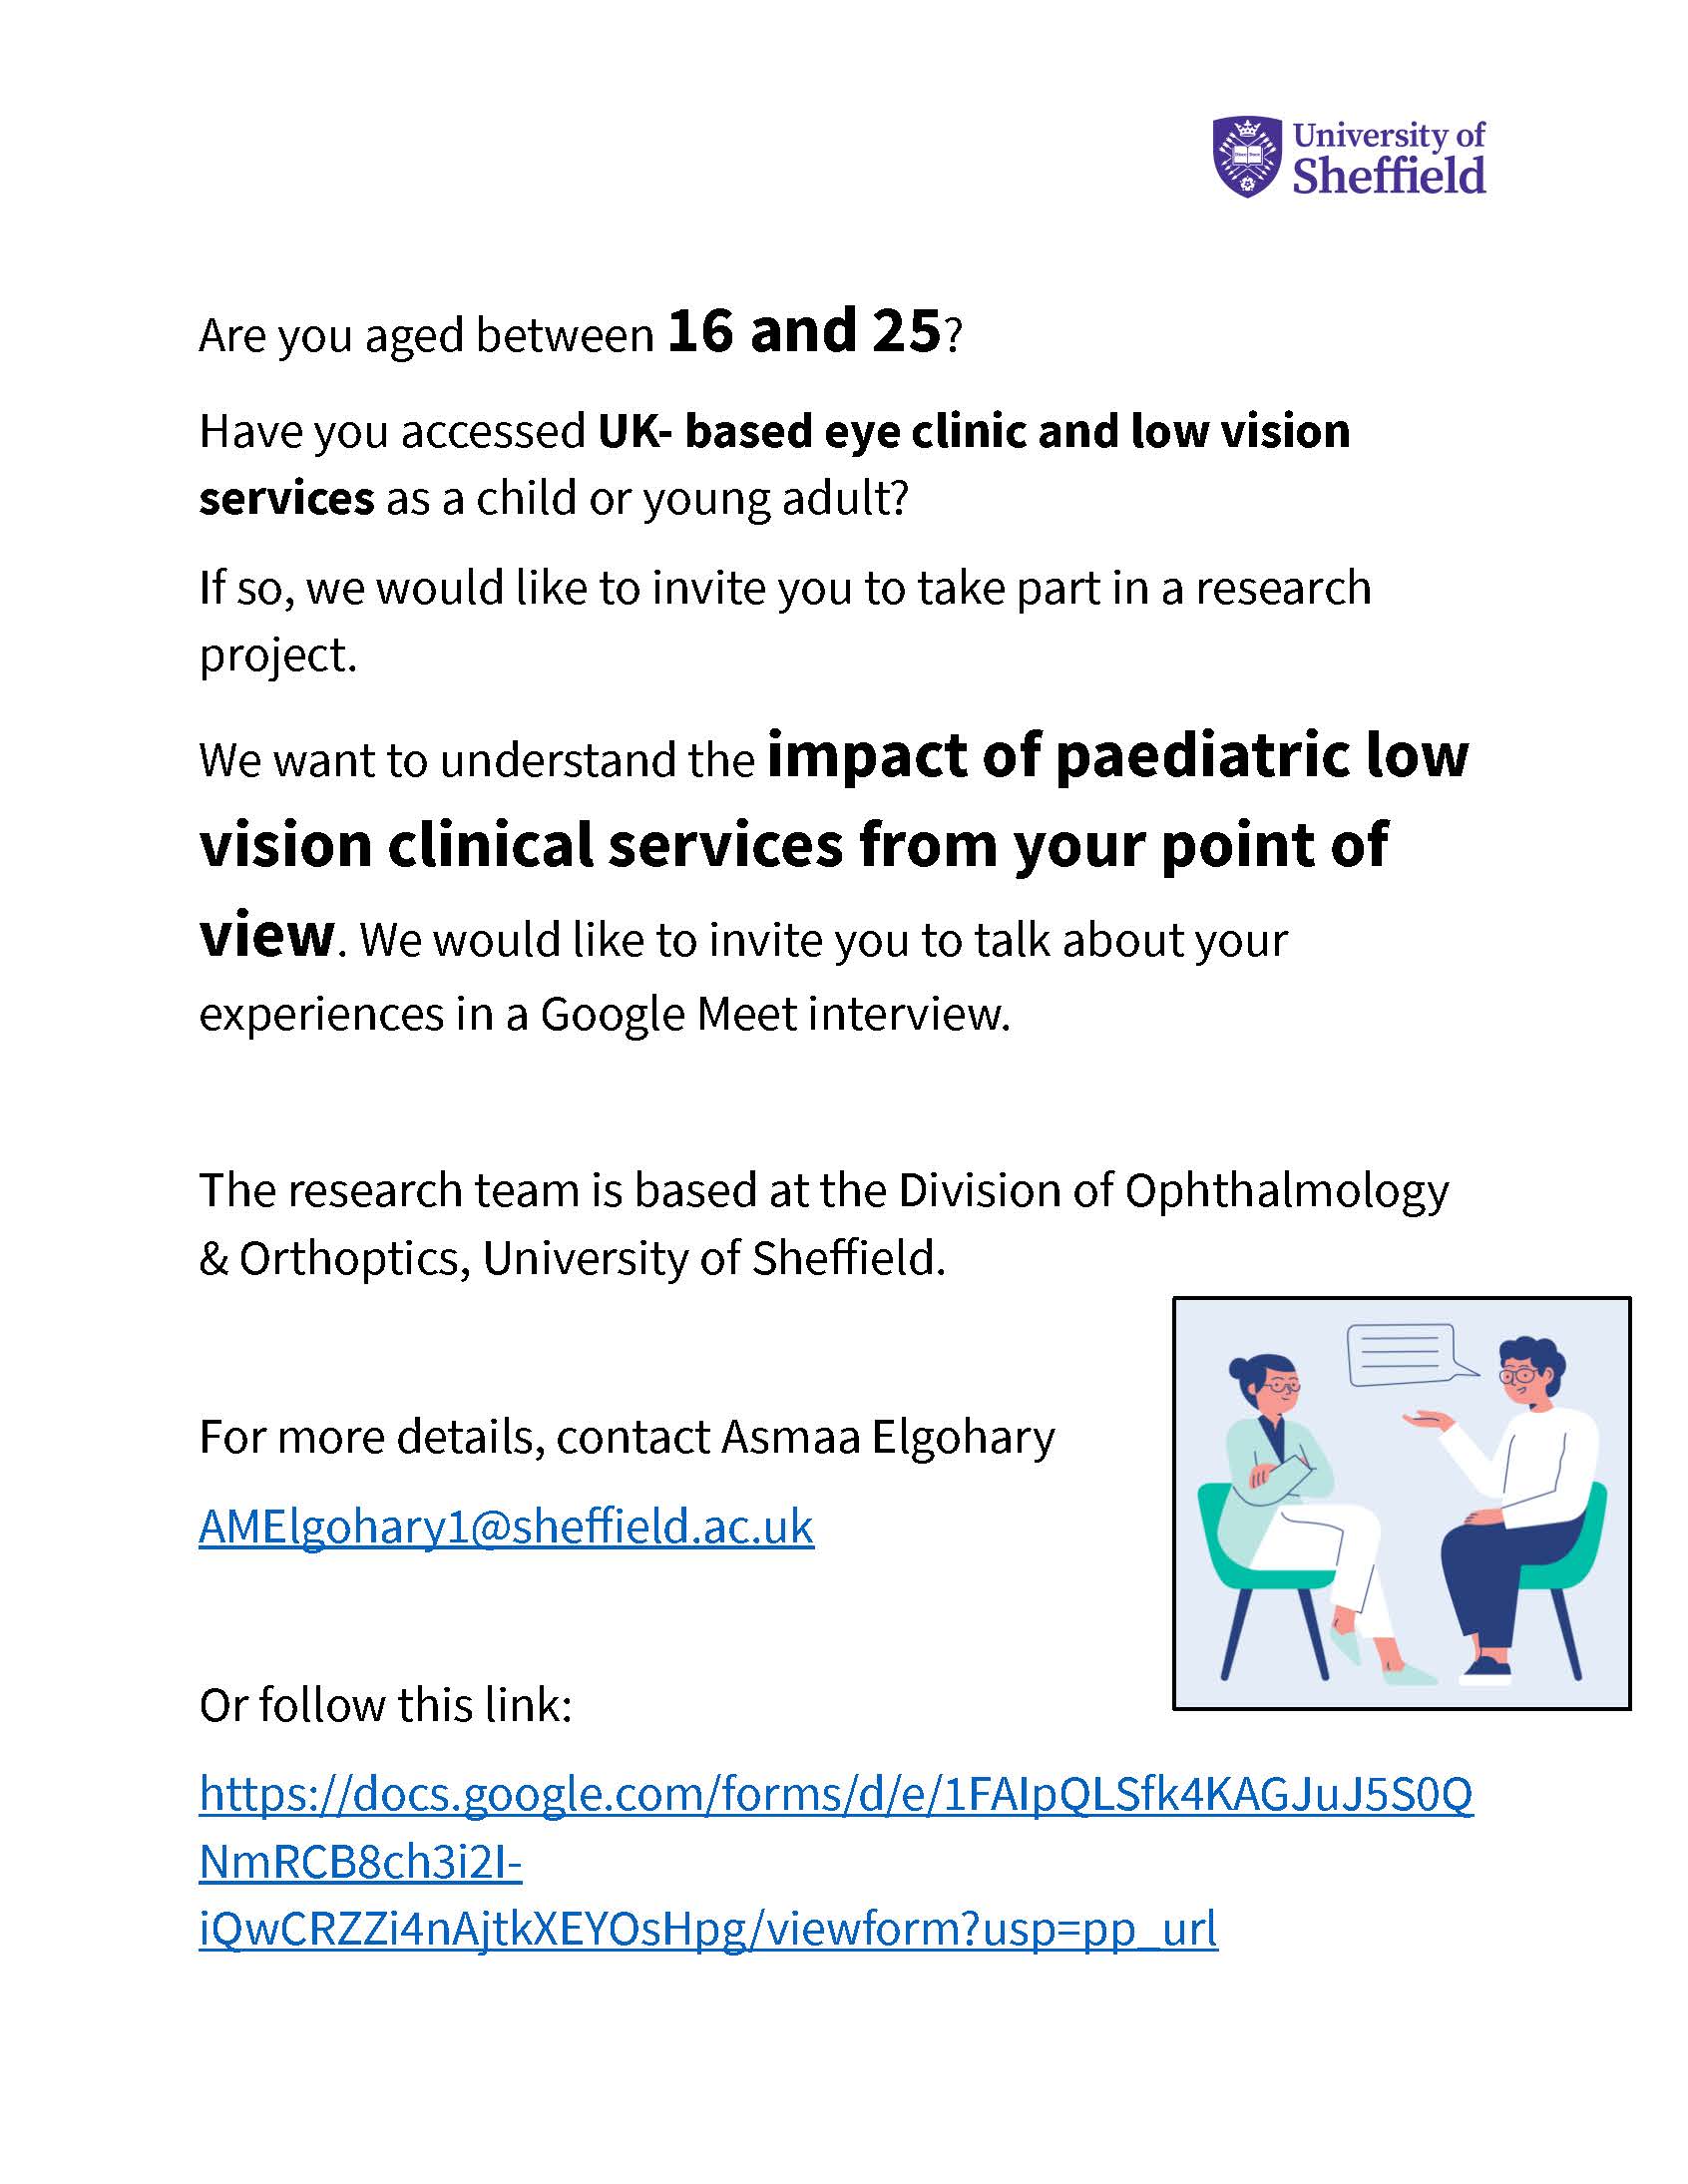 A poster promoting participation in the University of Sheffield interview research on paediatric services.